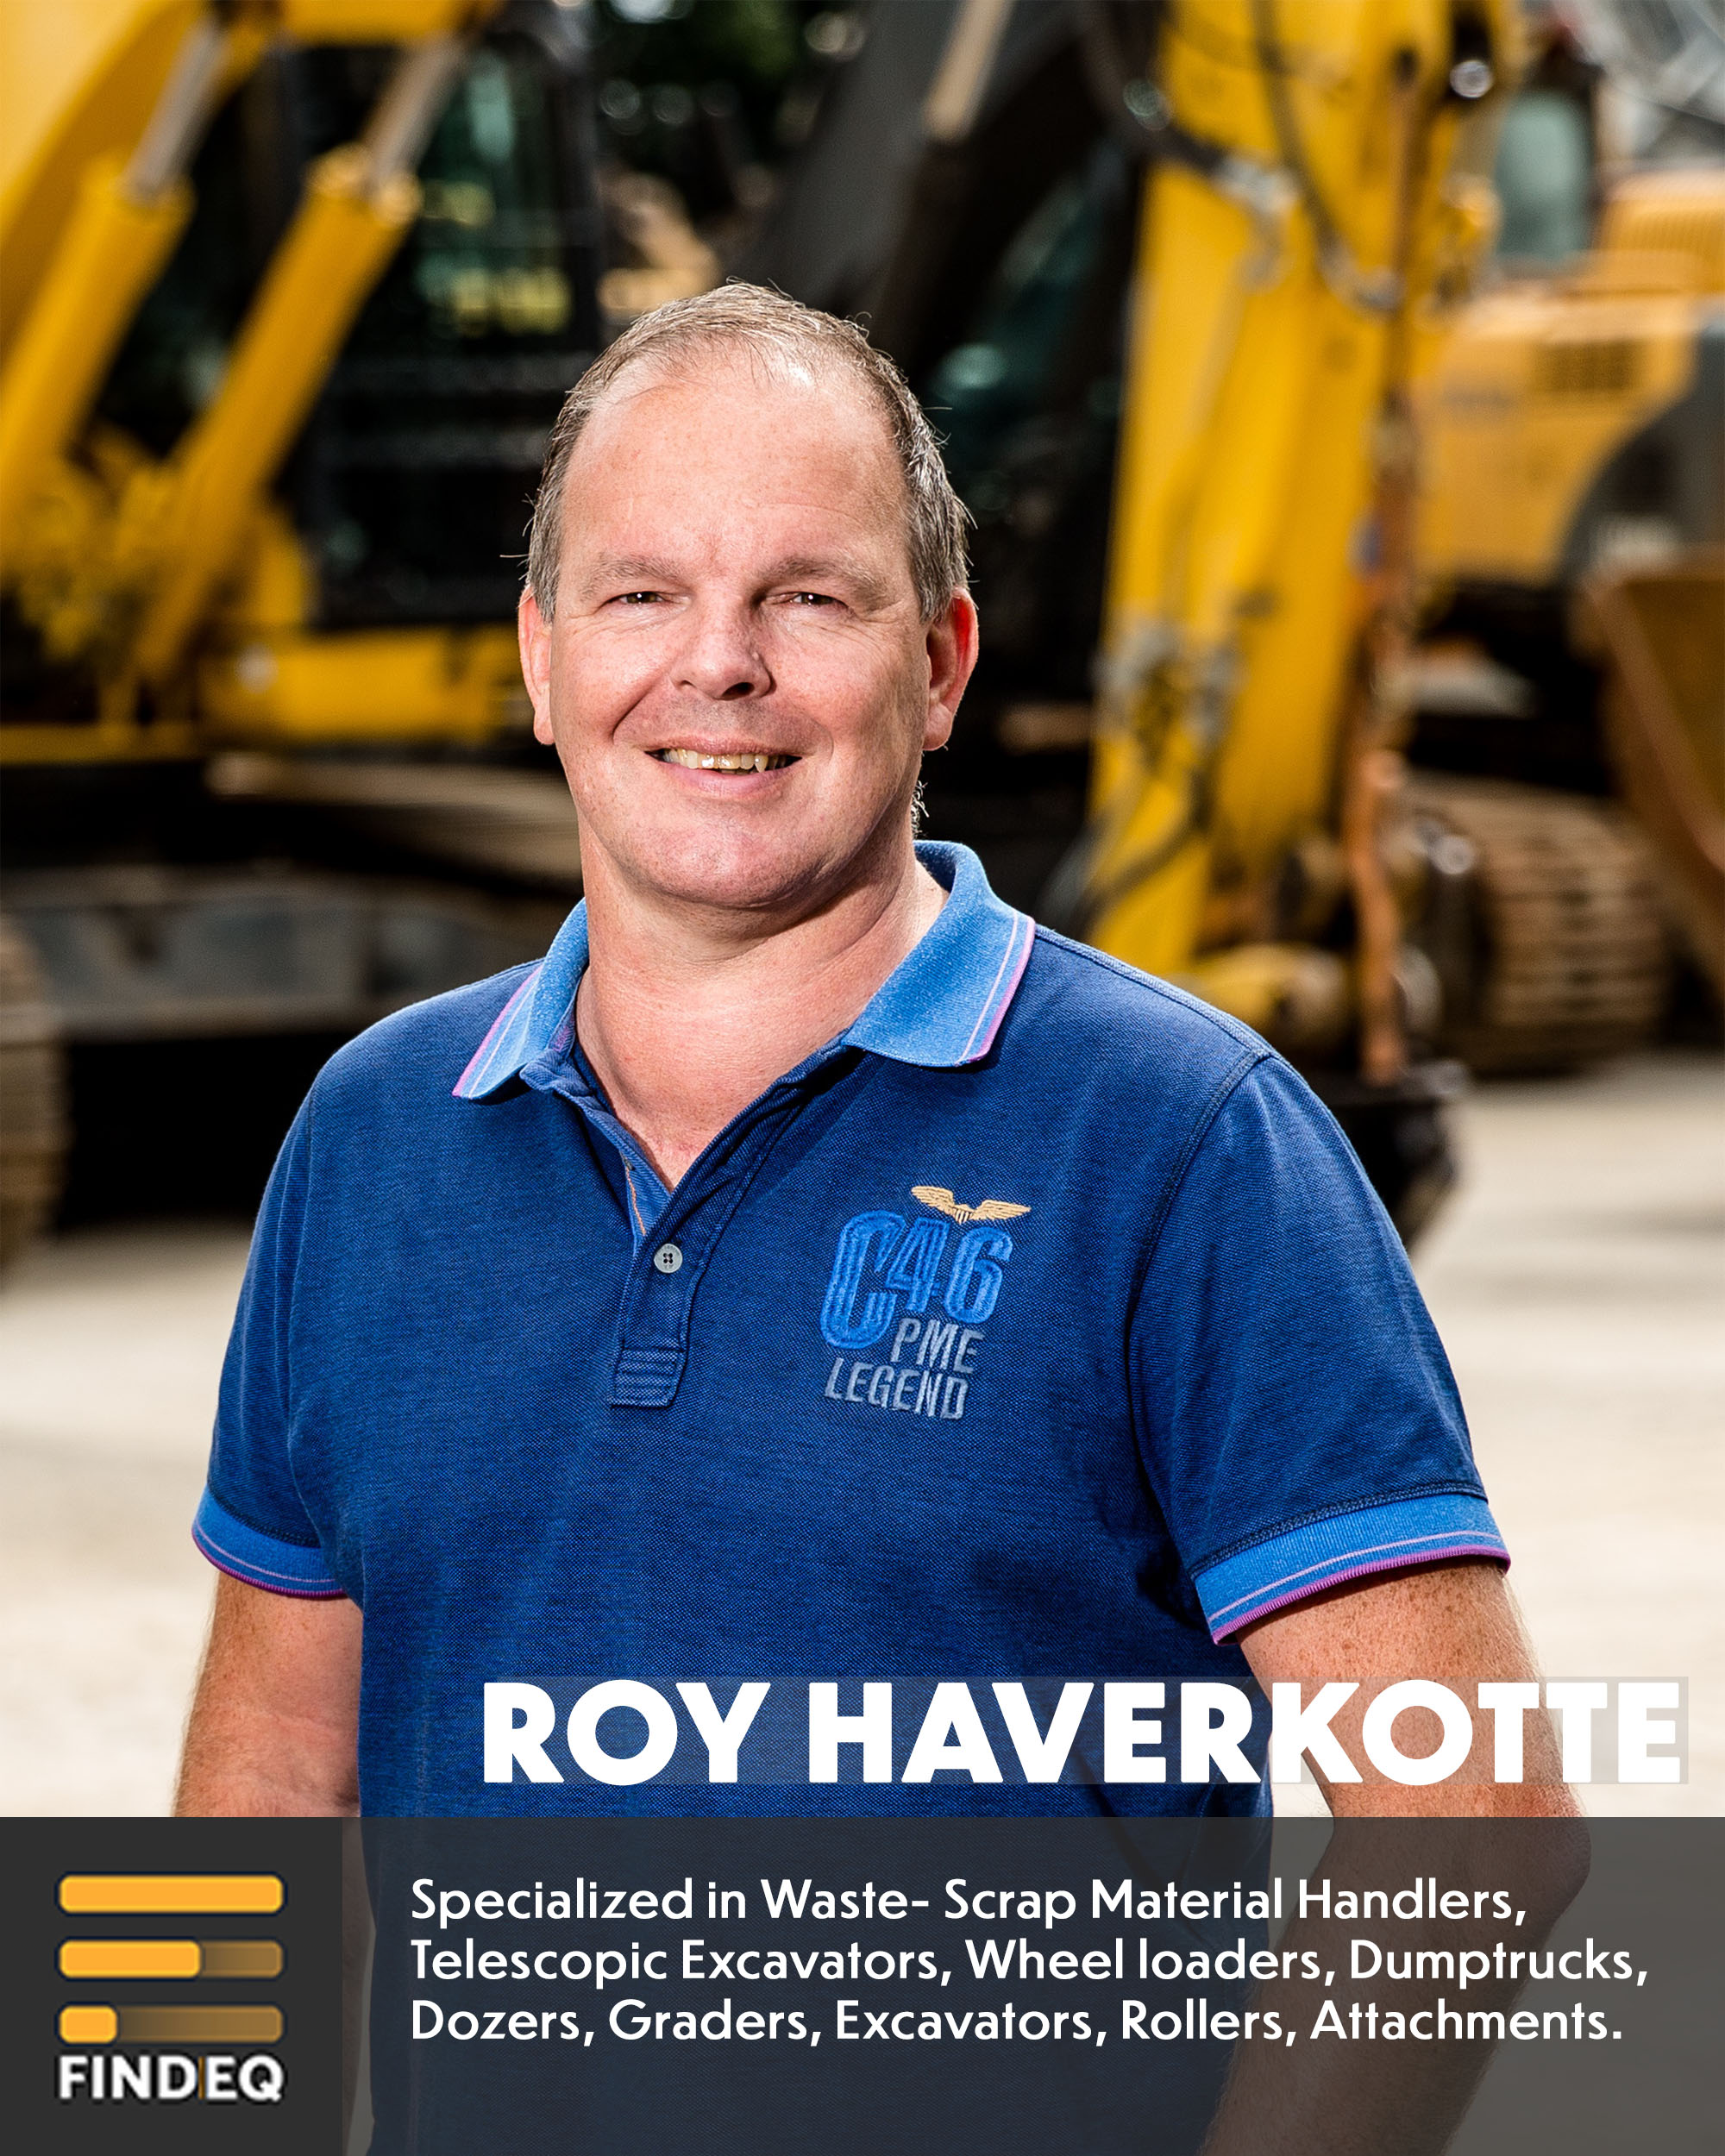 Roy haverkotte, co- owner and founder of findeq - find equipment